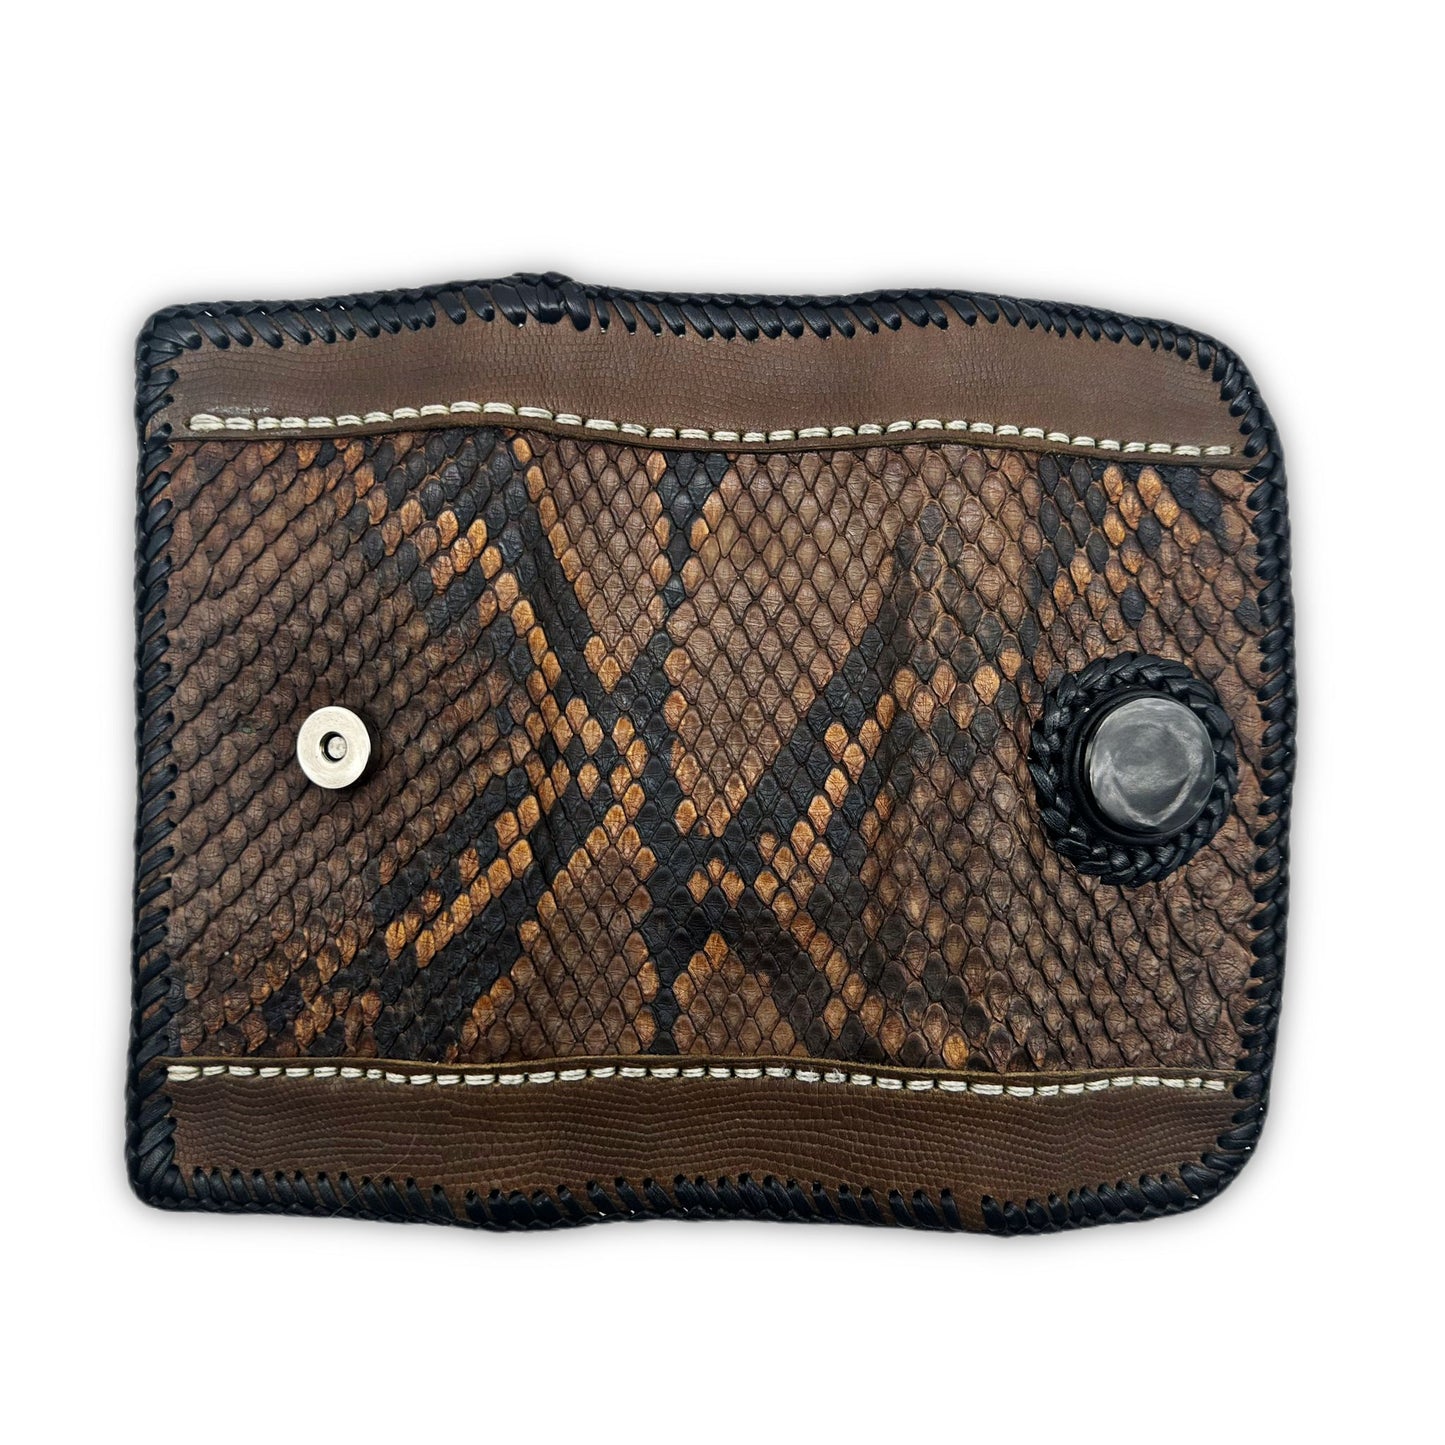 Trifecta Snakeskin Clutch in Taupe